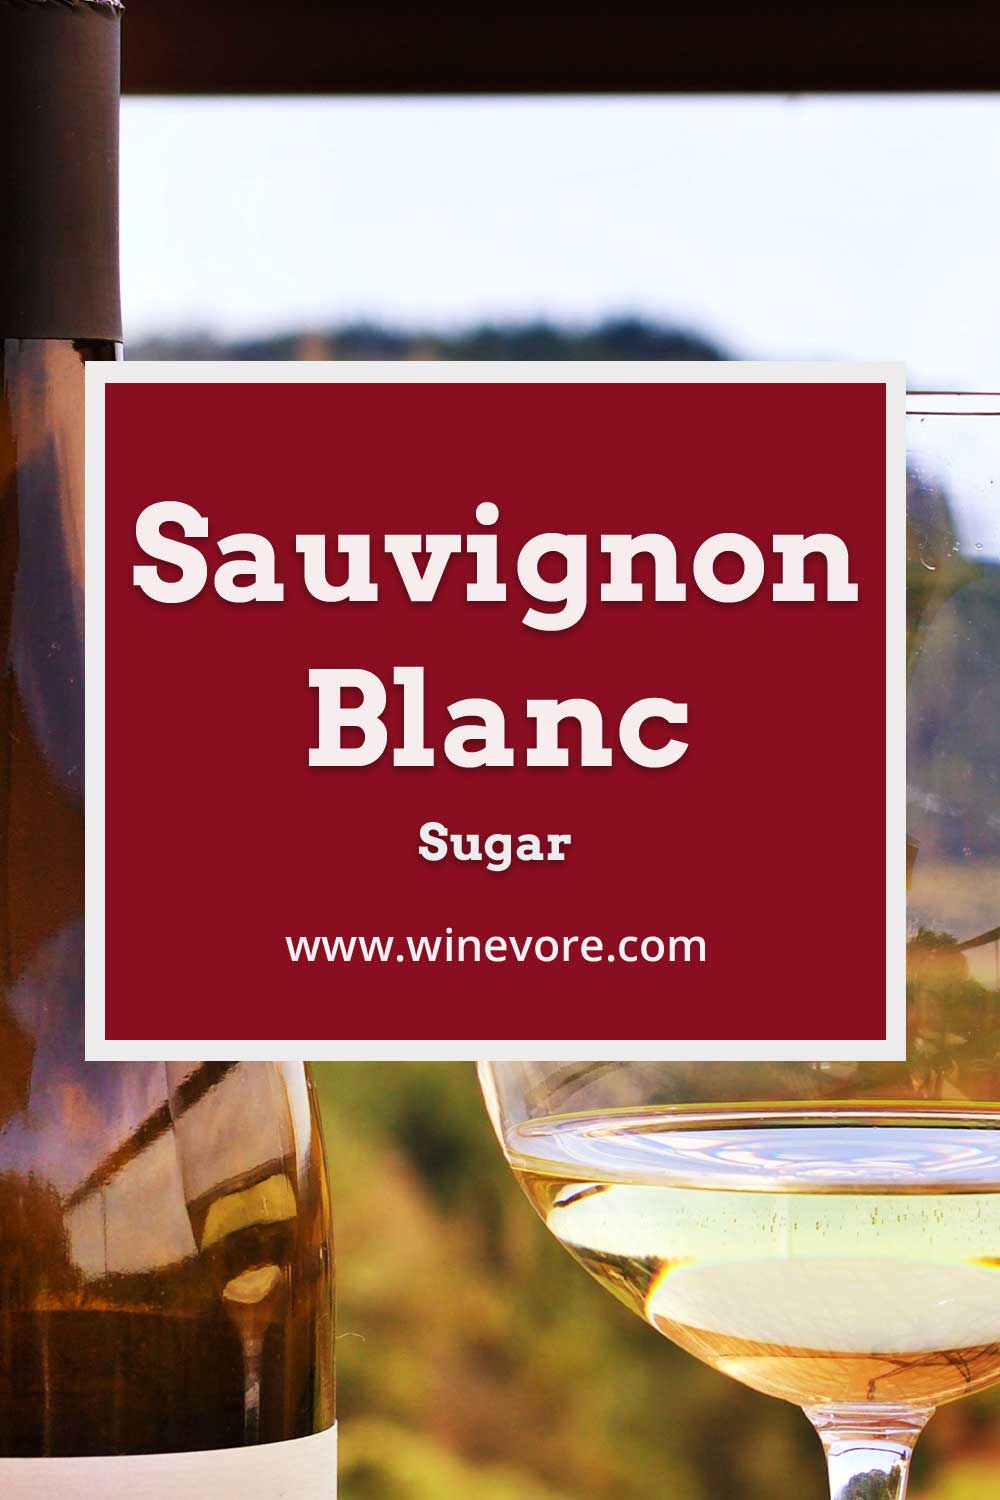 Wine glass and bottle in front of green surface - Sauvignon Blanc Sugar.